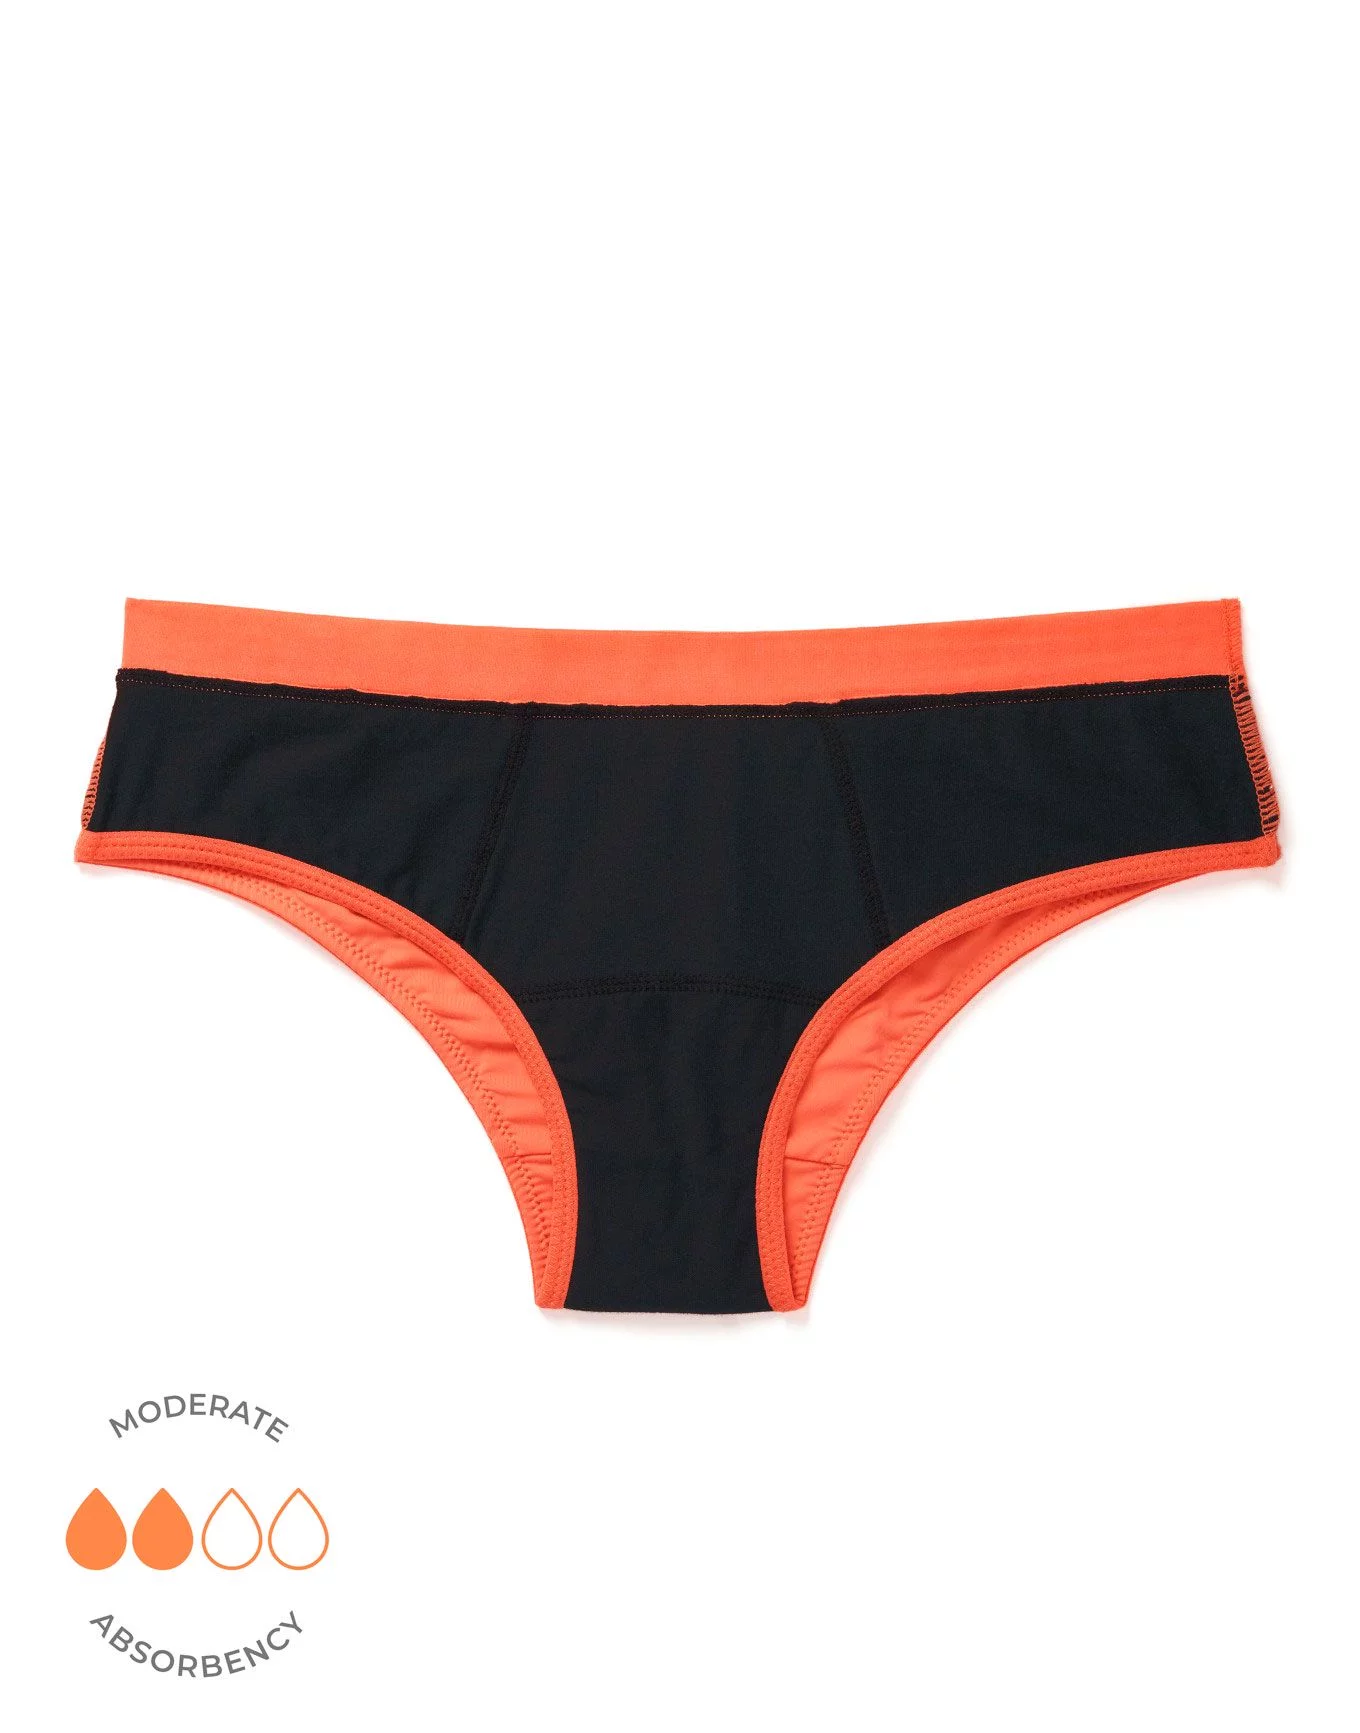 Blossom Orange Color Cutie Girl Panties (color may vary)